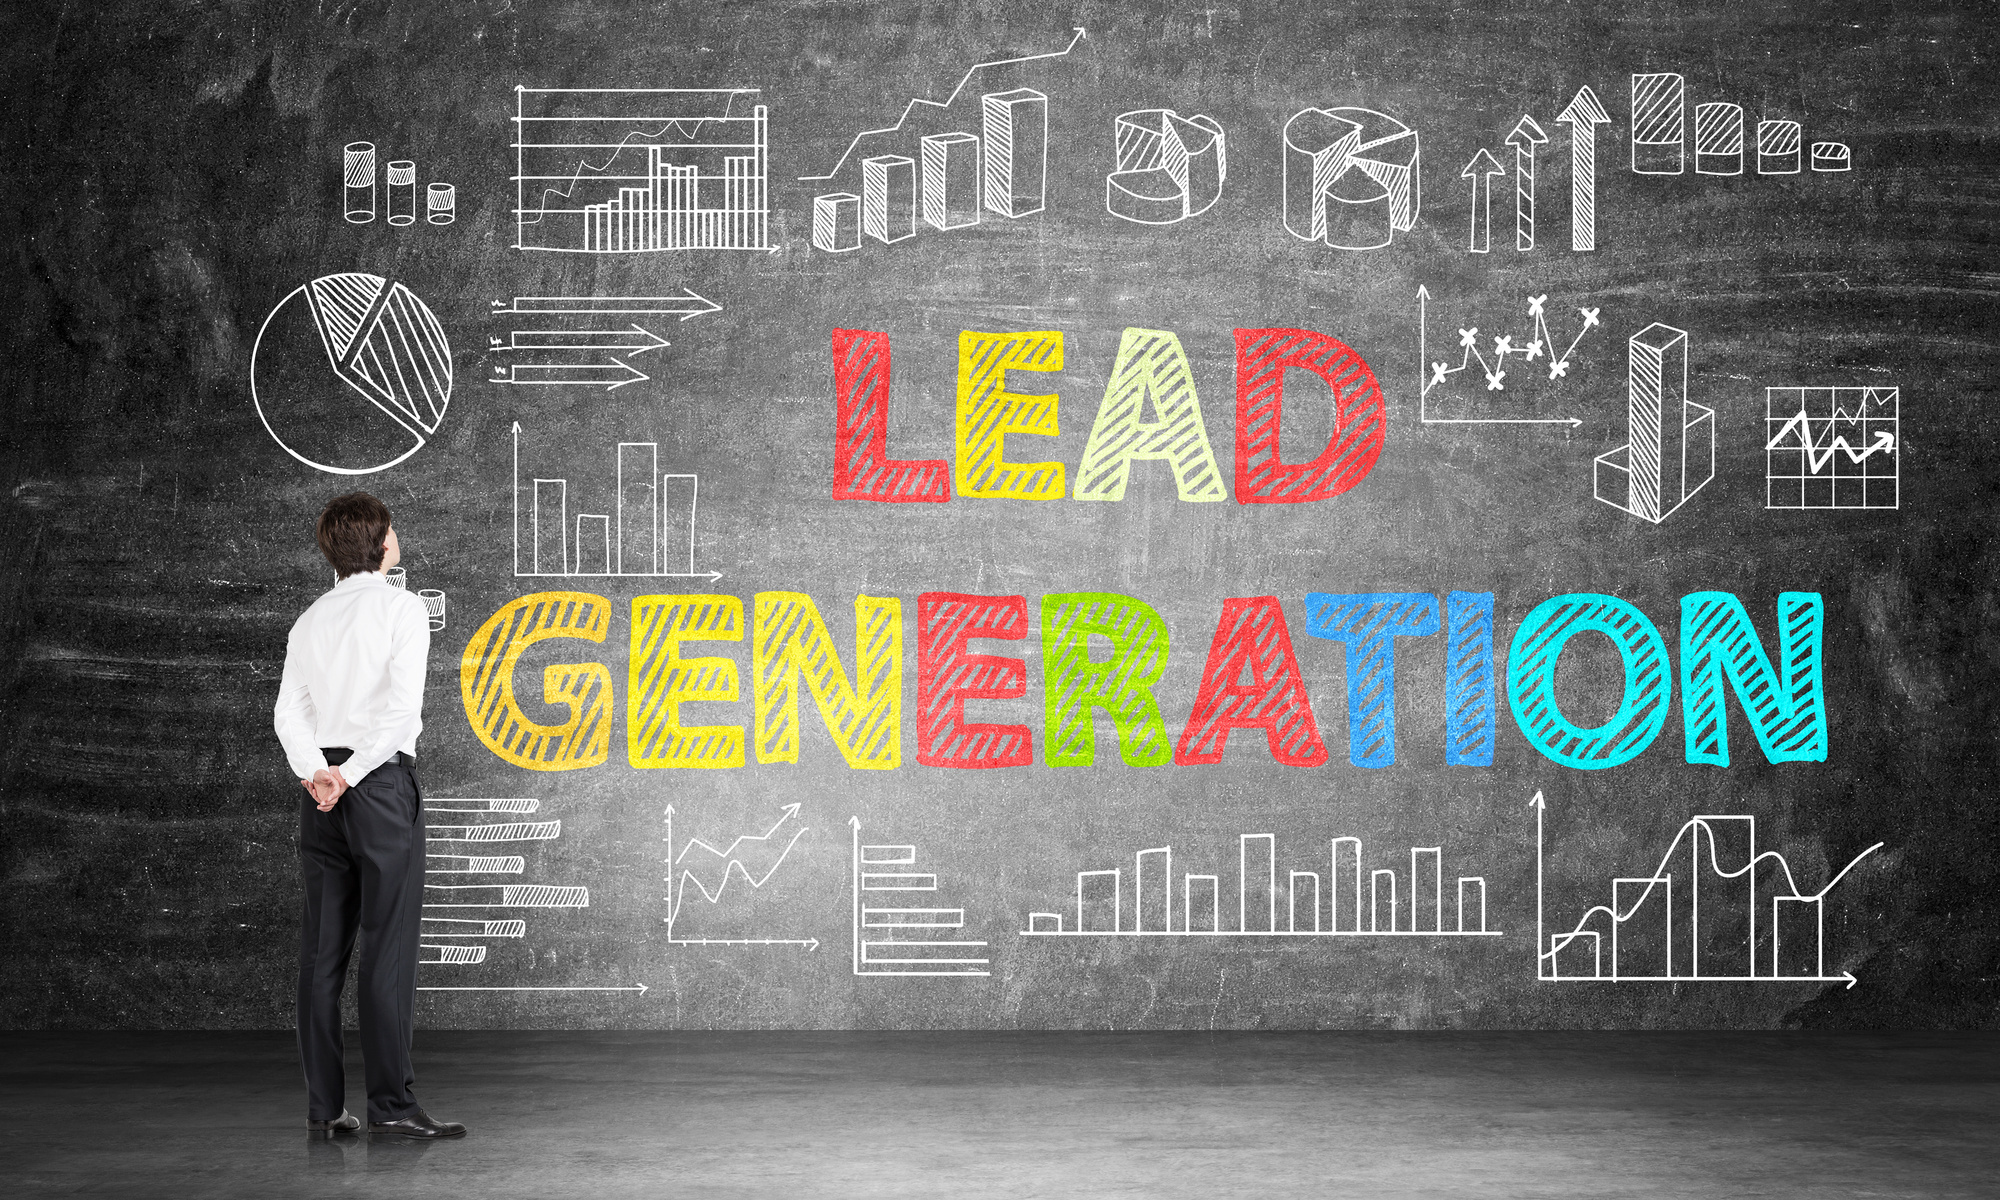 Become A Lead Generation Specialist